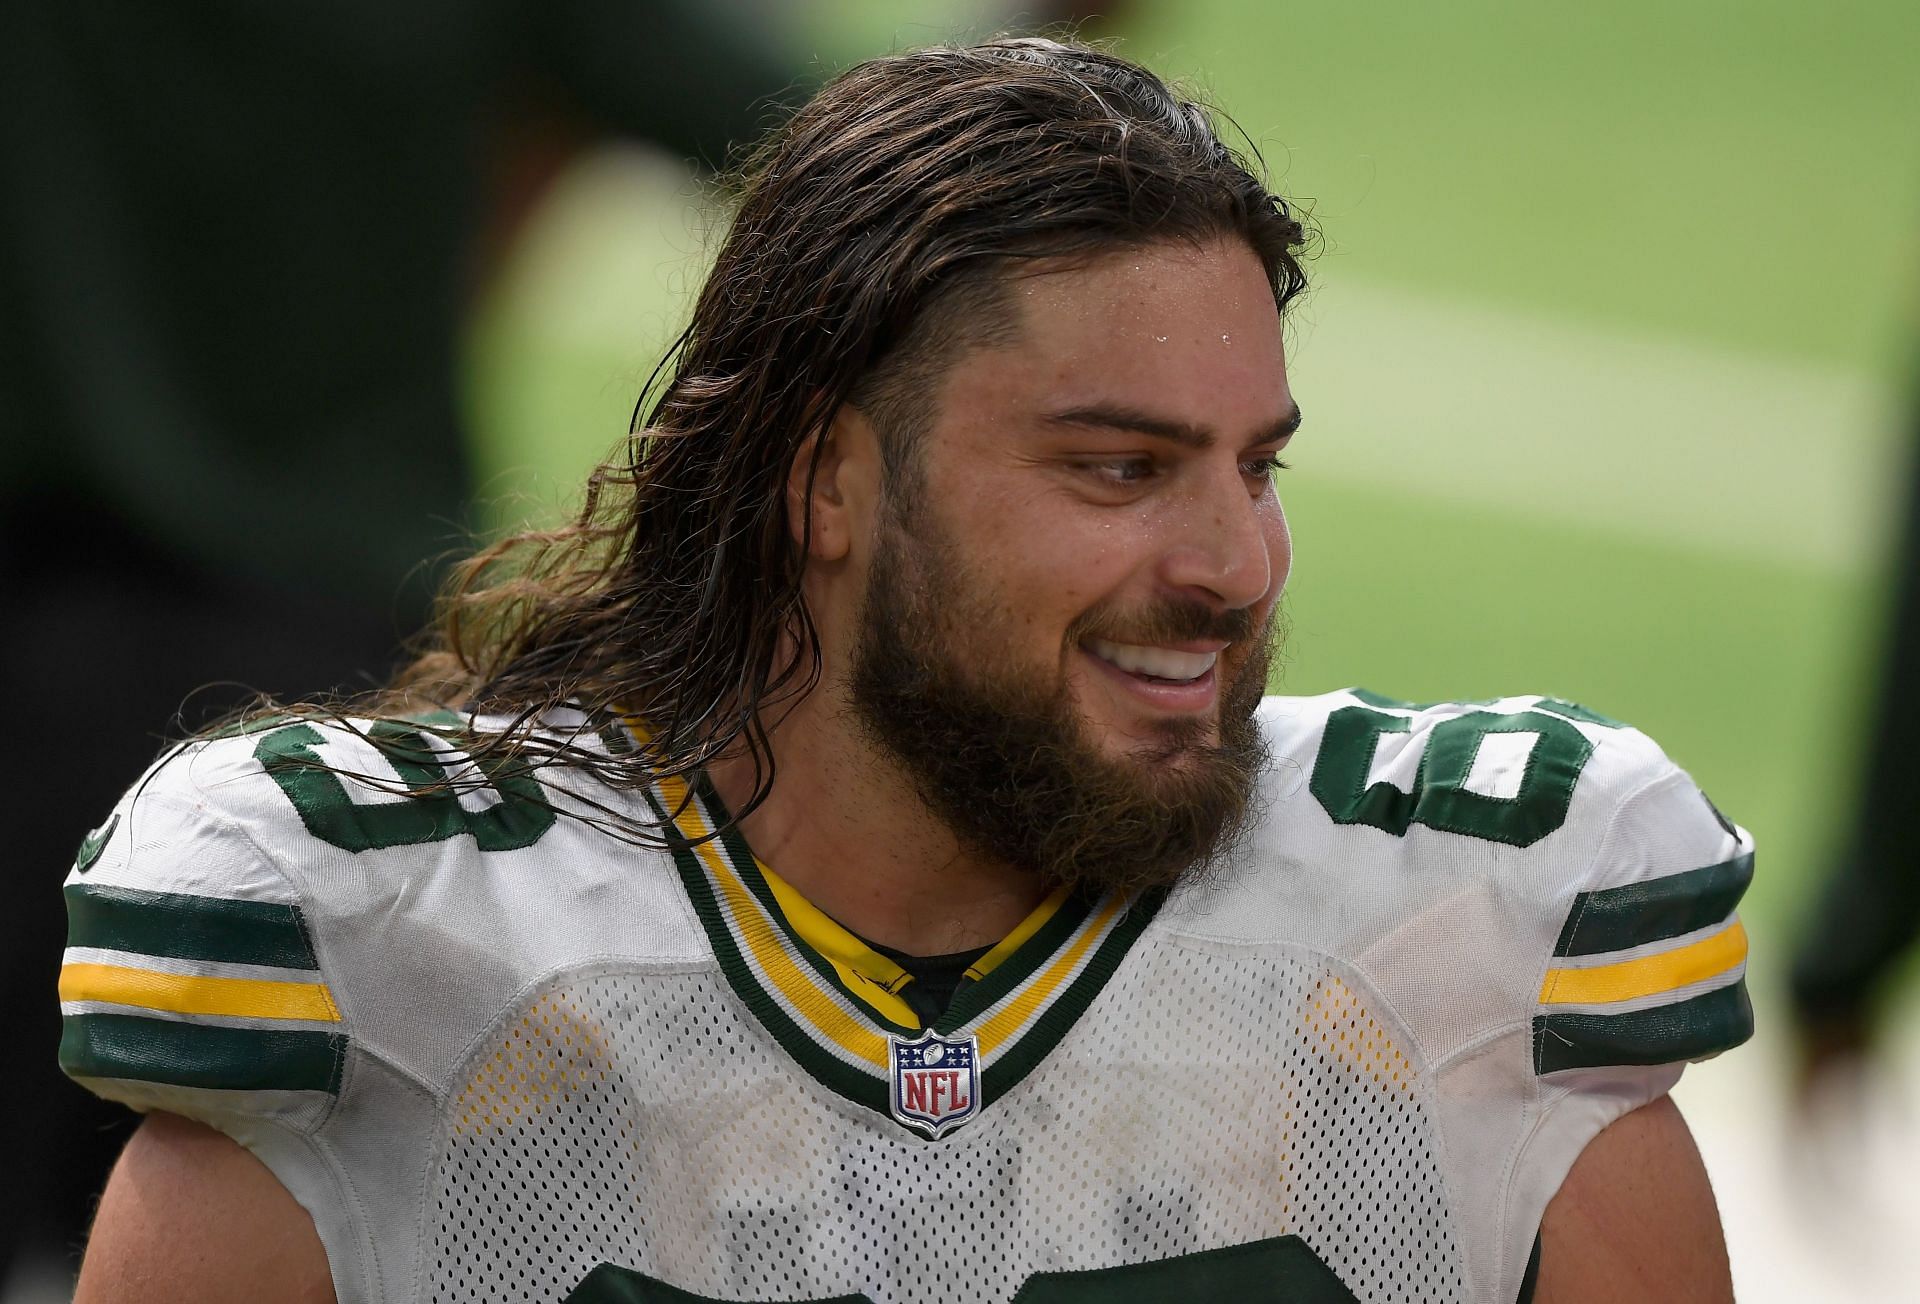 Bakhtiari is on the comeback trail after his ACL injury